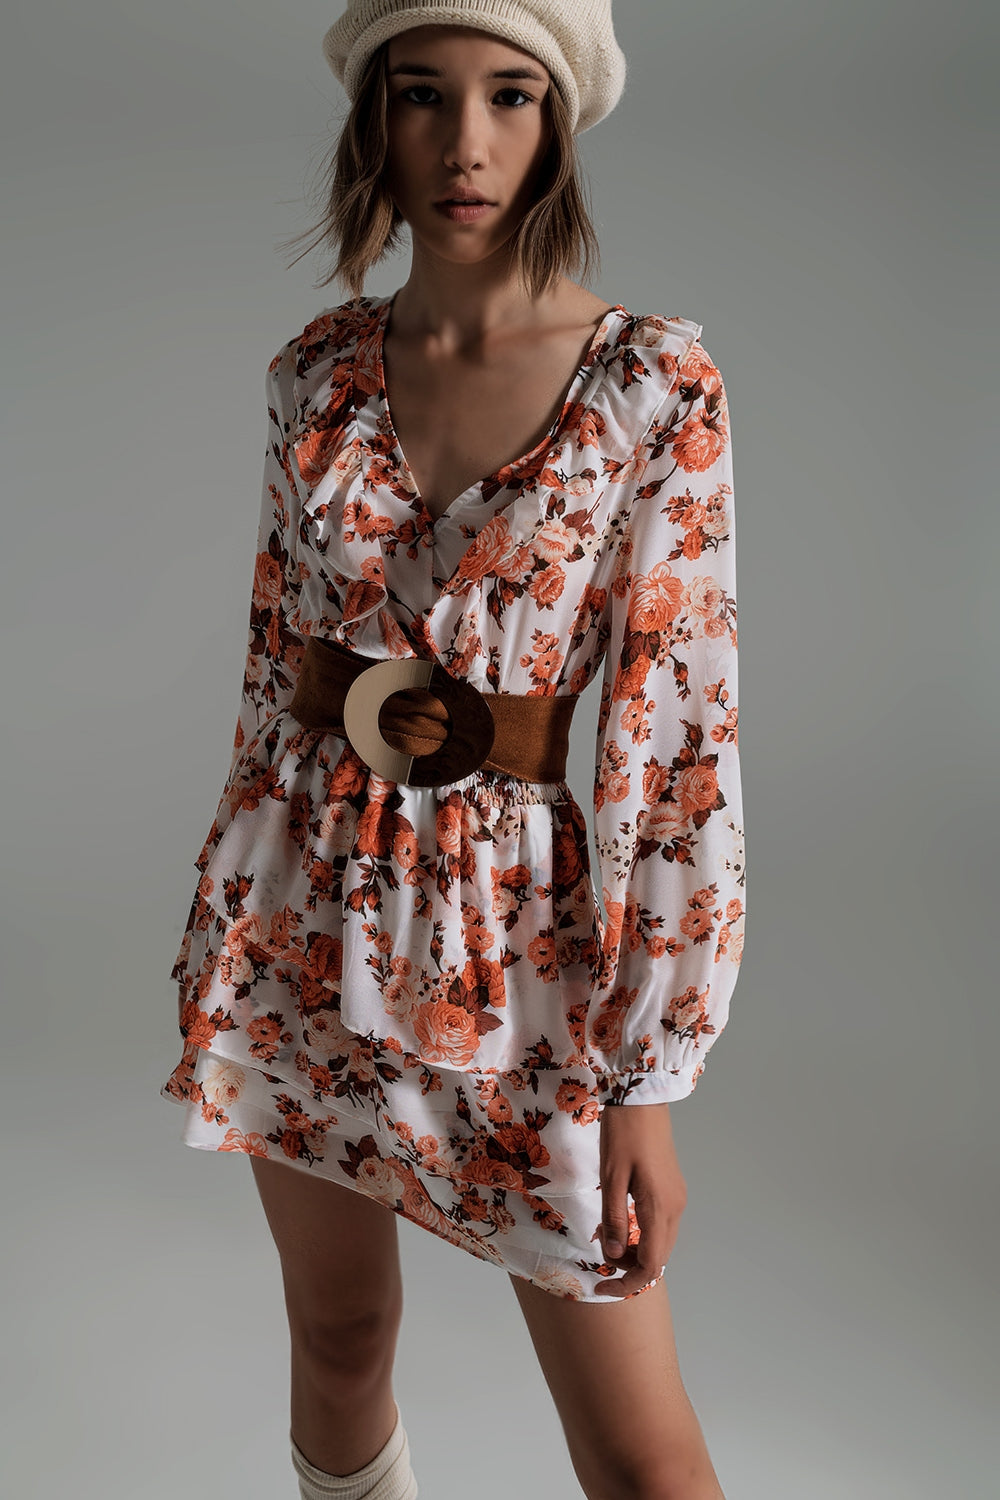 Short Dress With Ruffle Neck And Cinched In Waist in Autumn Floral Print - Szua Store